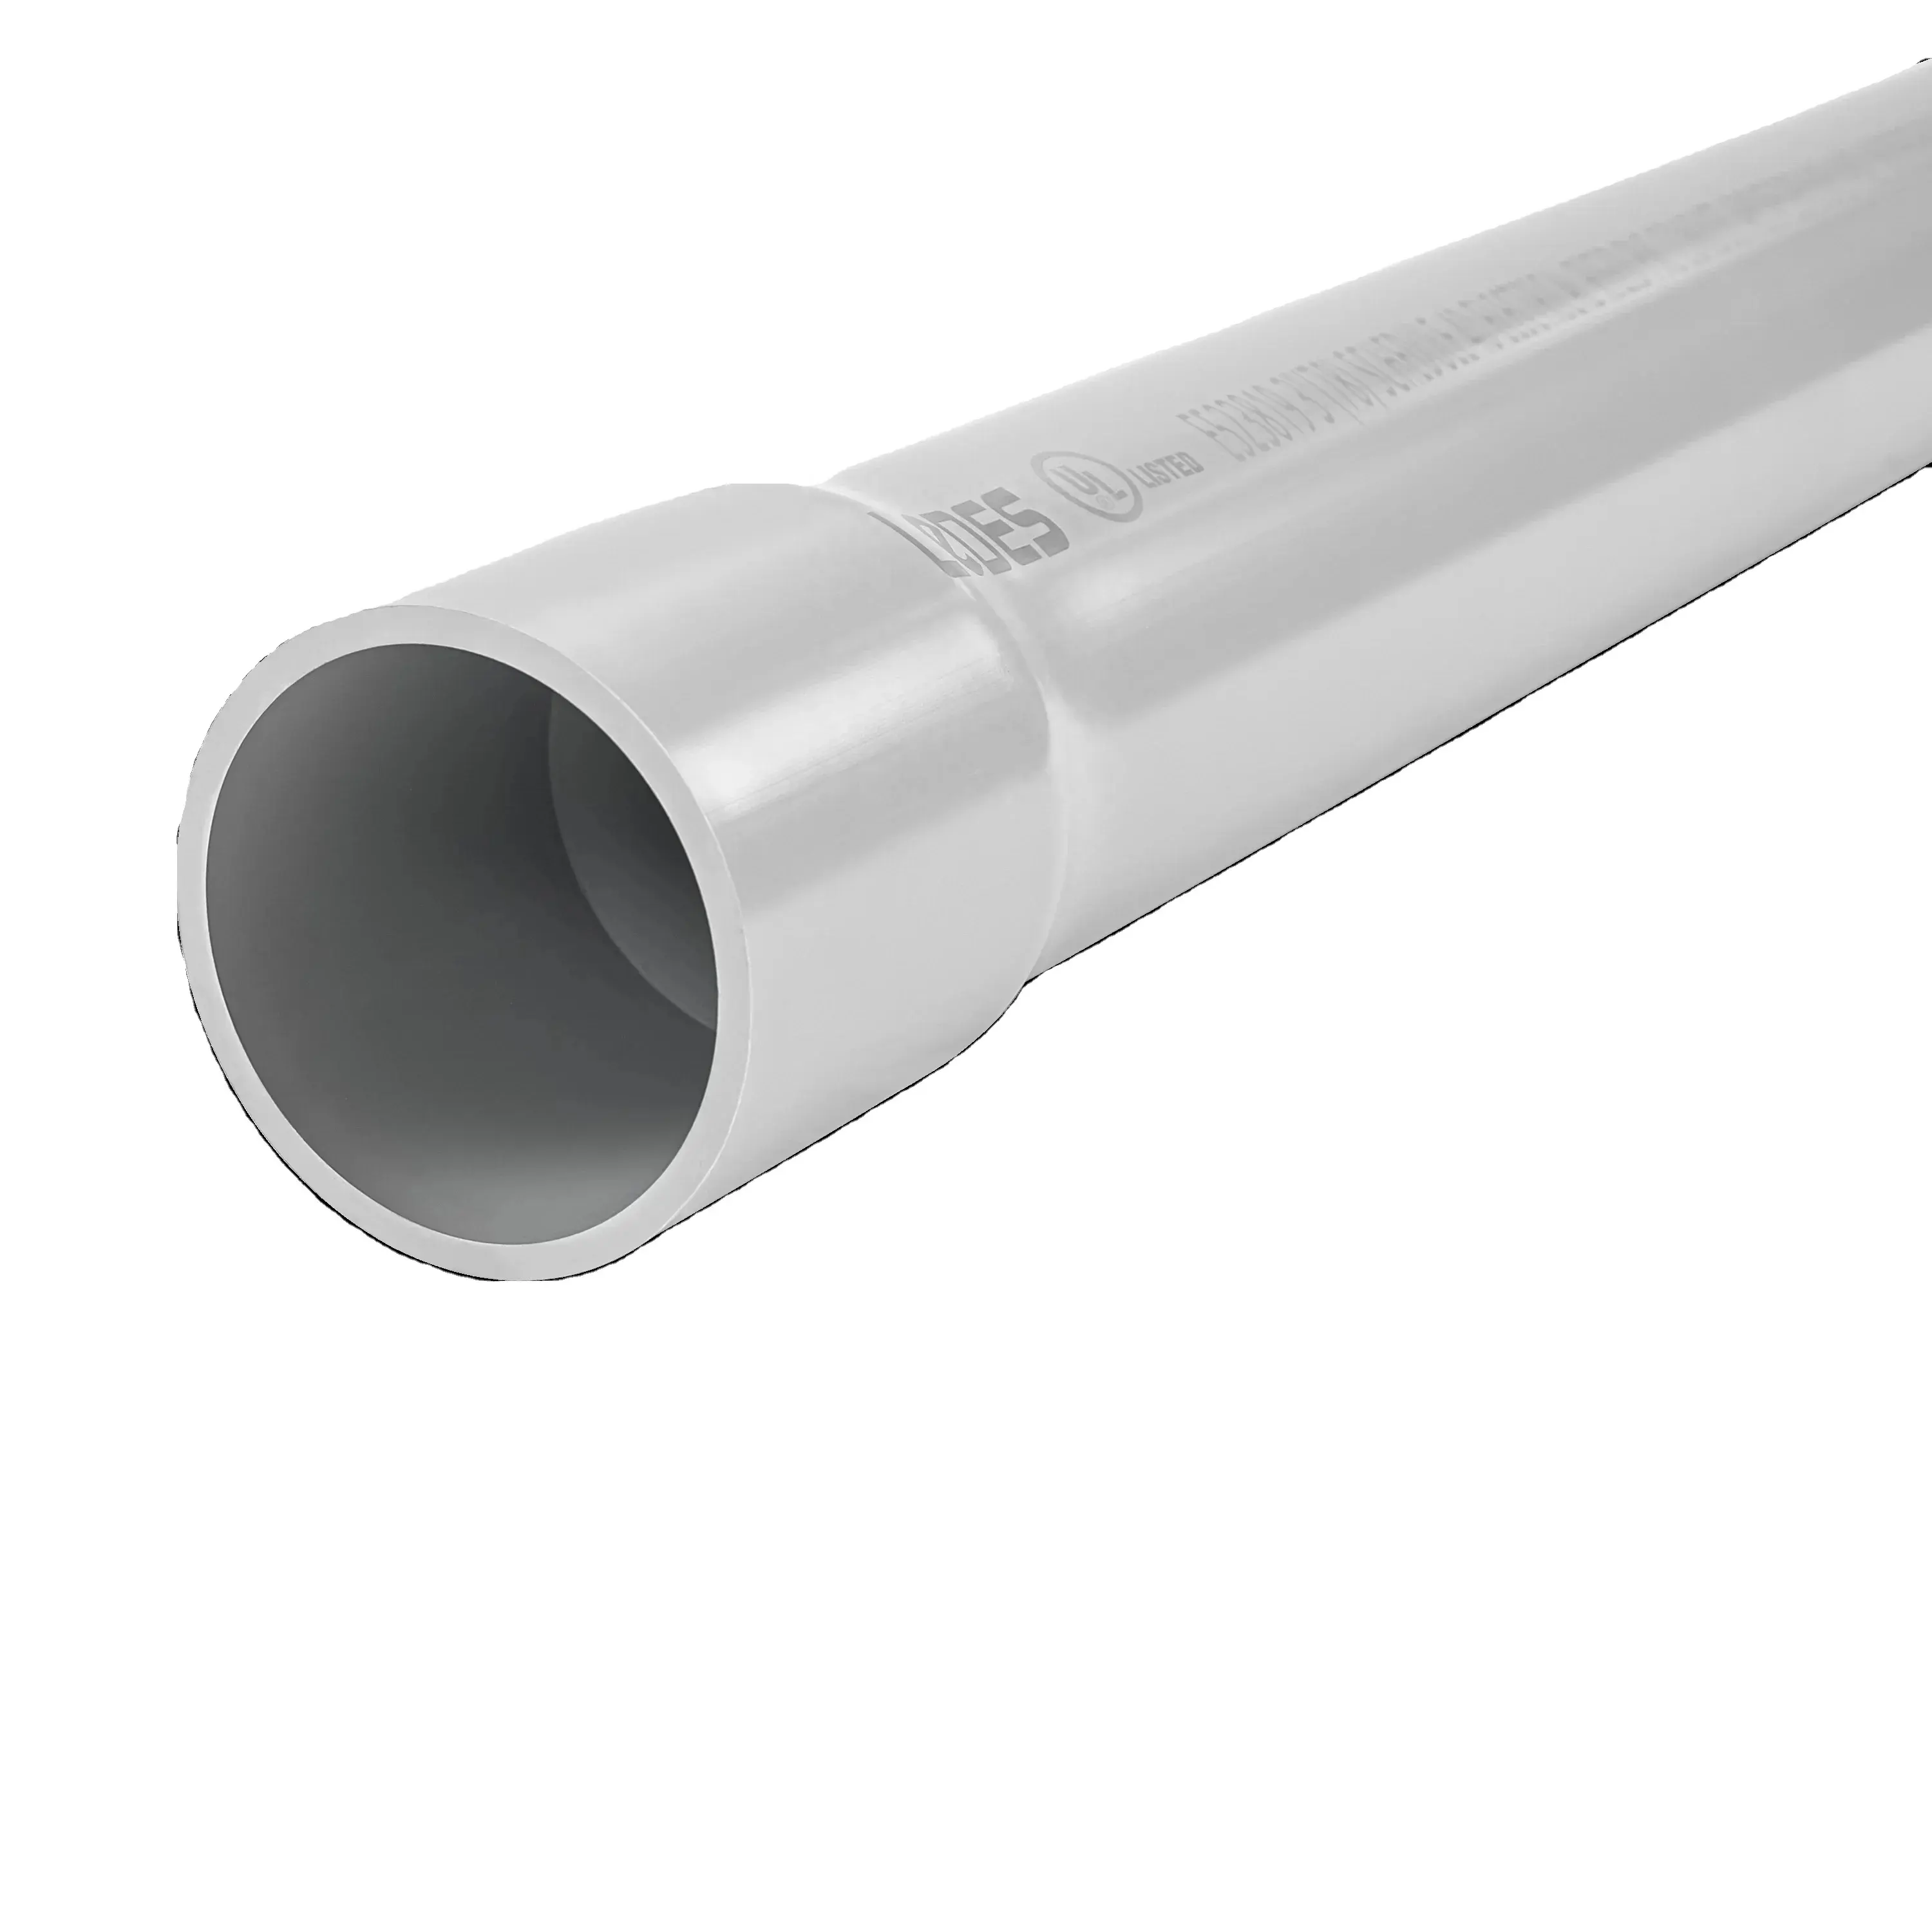 LeDES 3" Sch 40 PVC Pipe FT4 Fire Rated Electrical rigid PVC Conduit Pipe UL 651 Certified Sunlight Resistant for Wiring Project